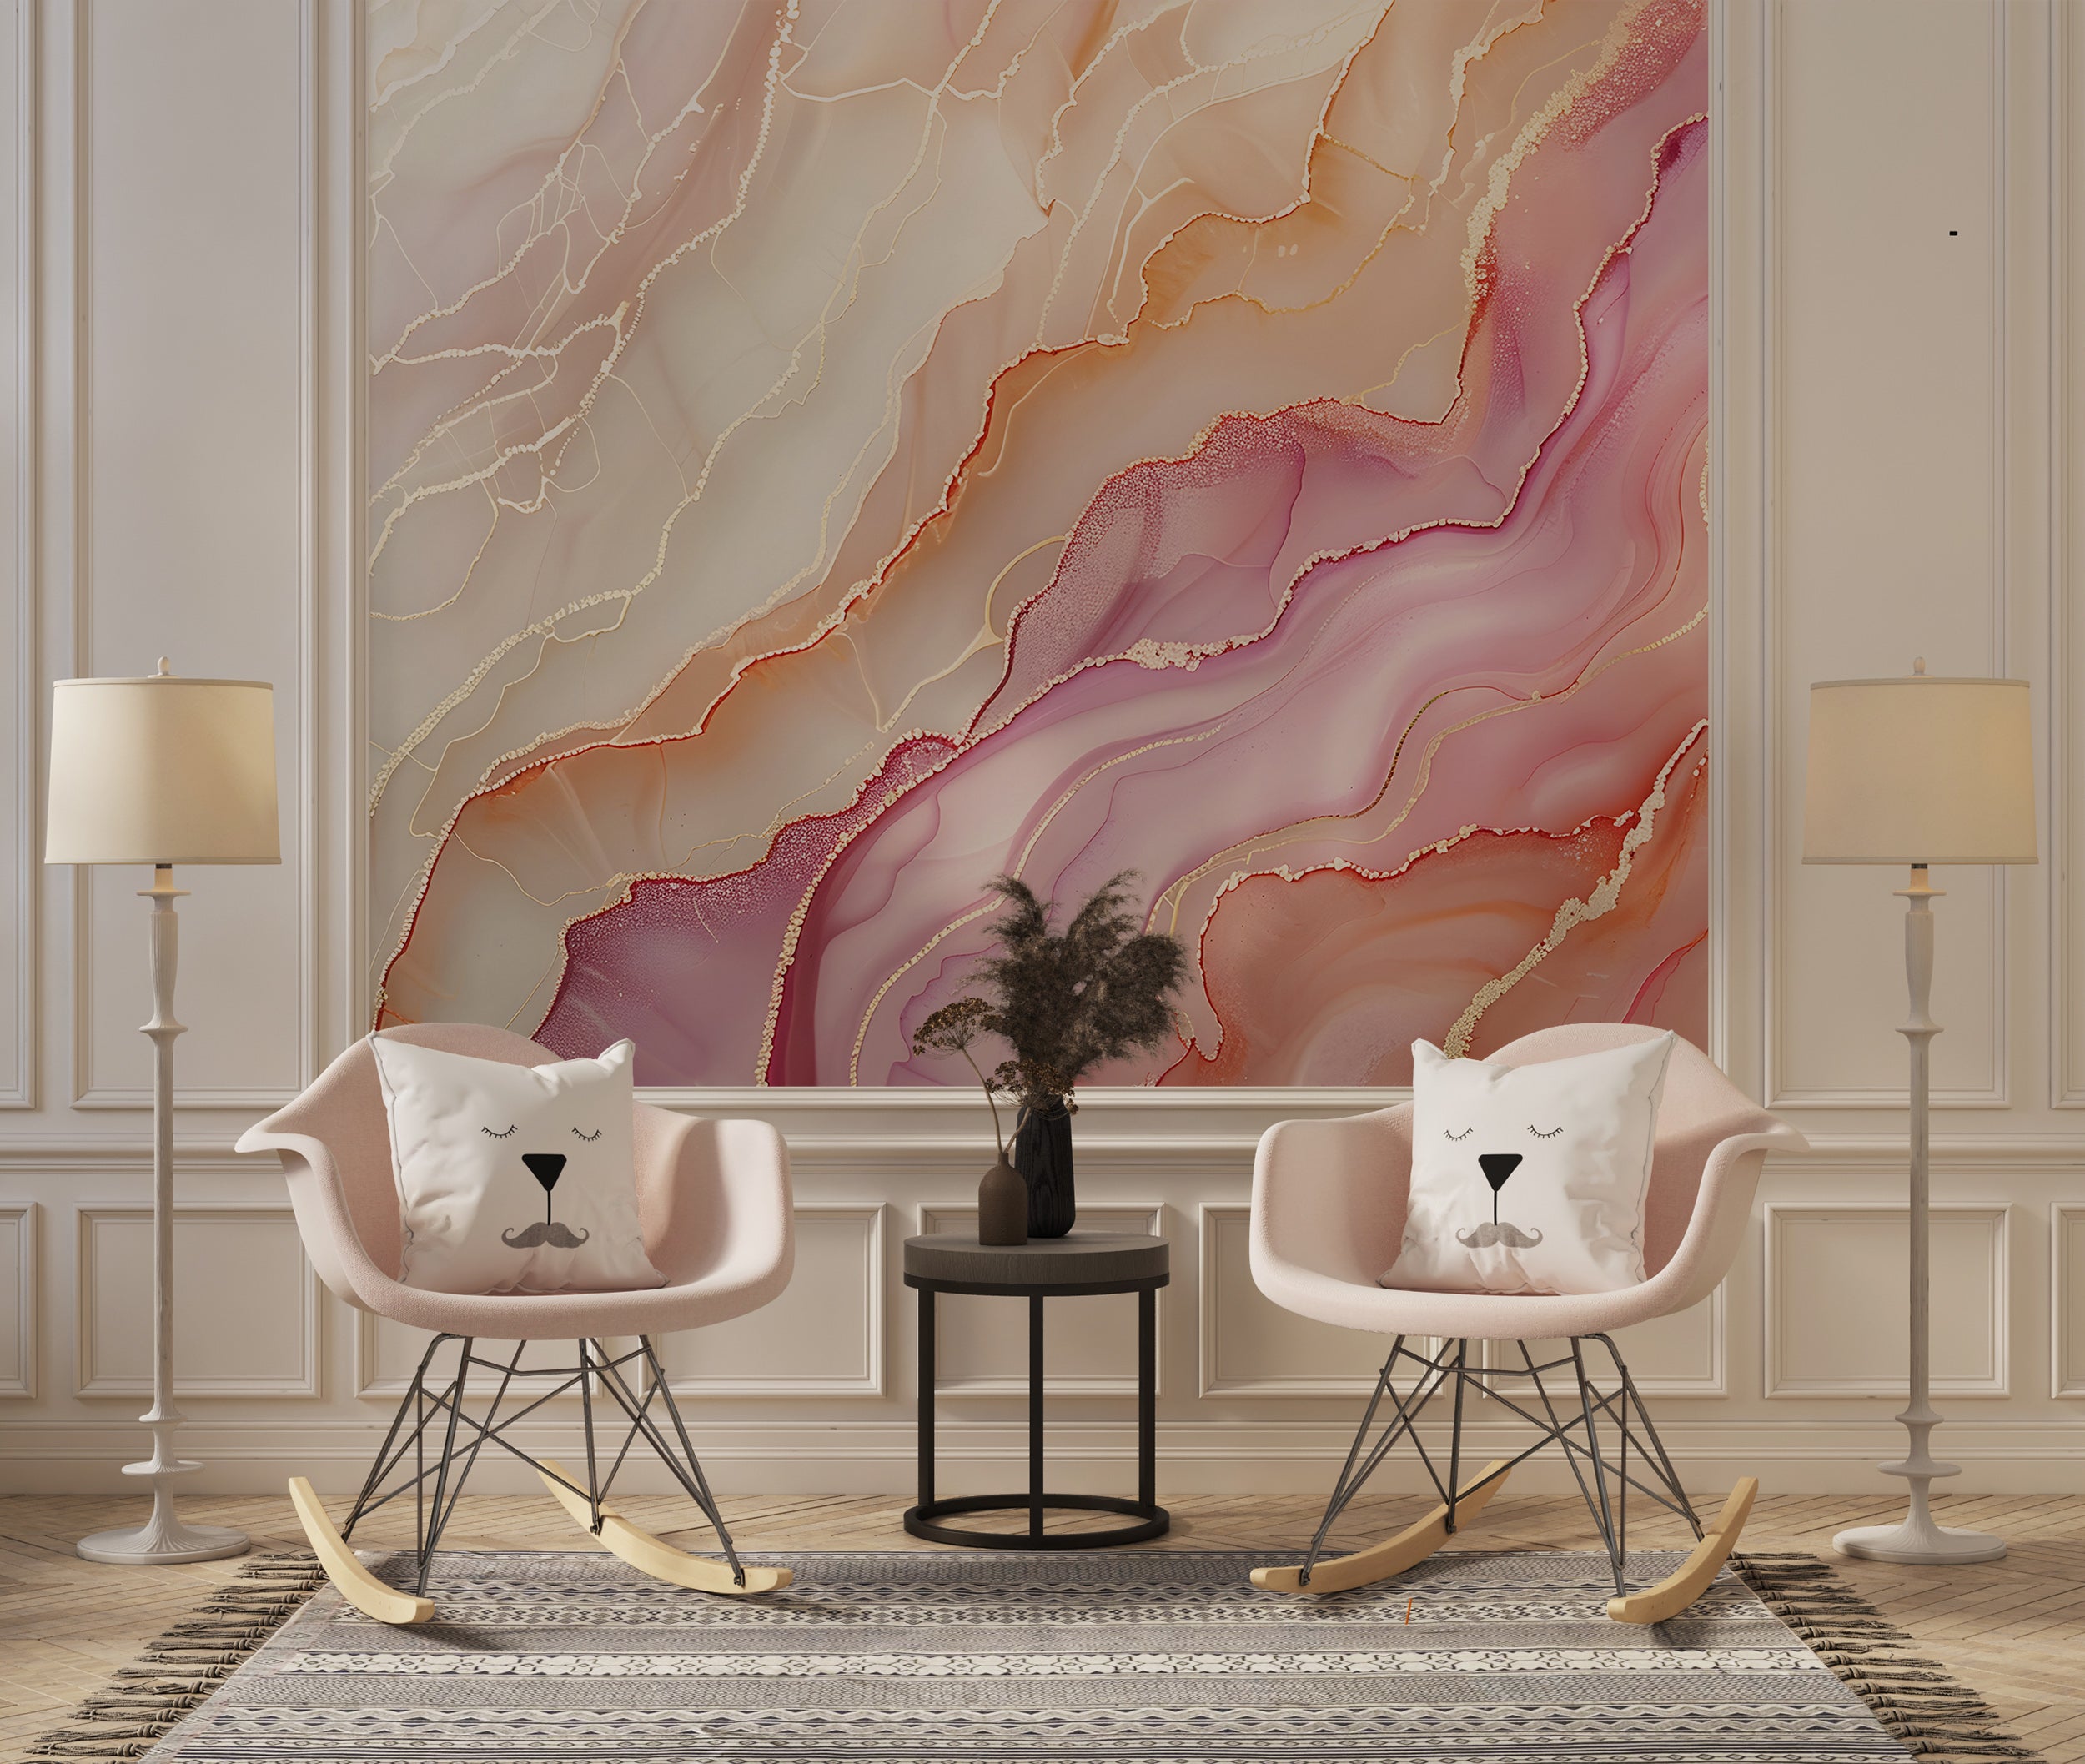 Marble Texture in Soft Pastel Colors Wallpaper, Peel and Stick Colorful Alcohol Ink Wall Mural, Removable Accent Wall Marble Decal